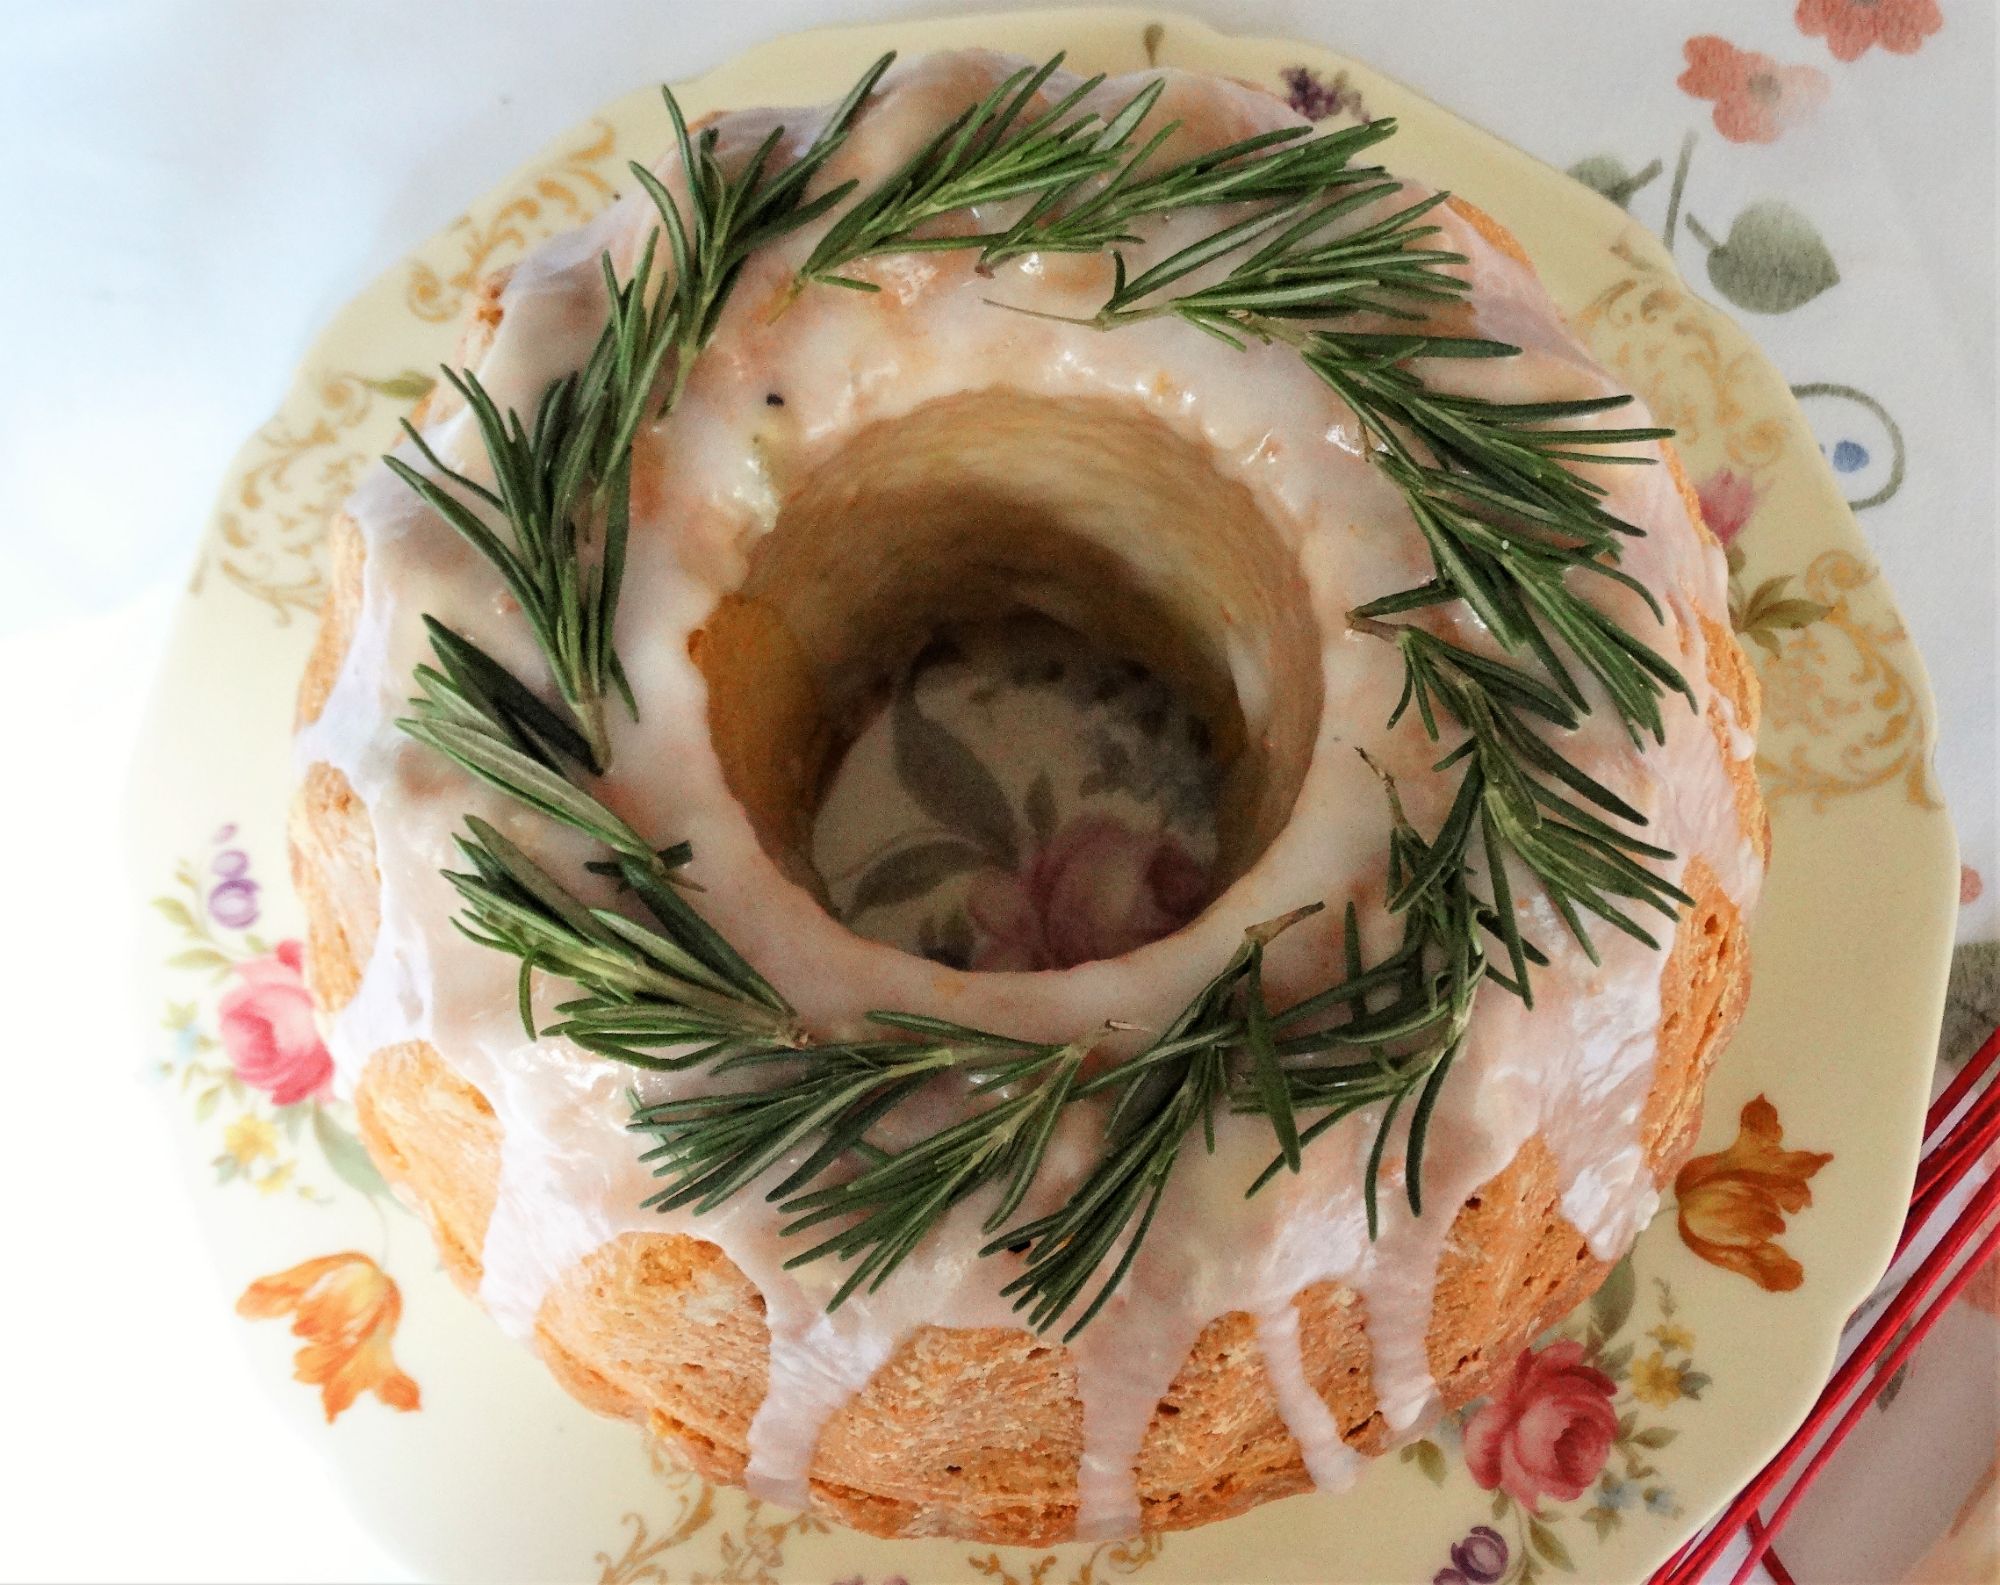 Mother's Day Wreath Cake